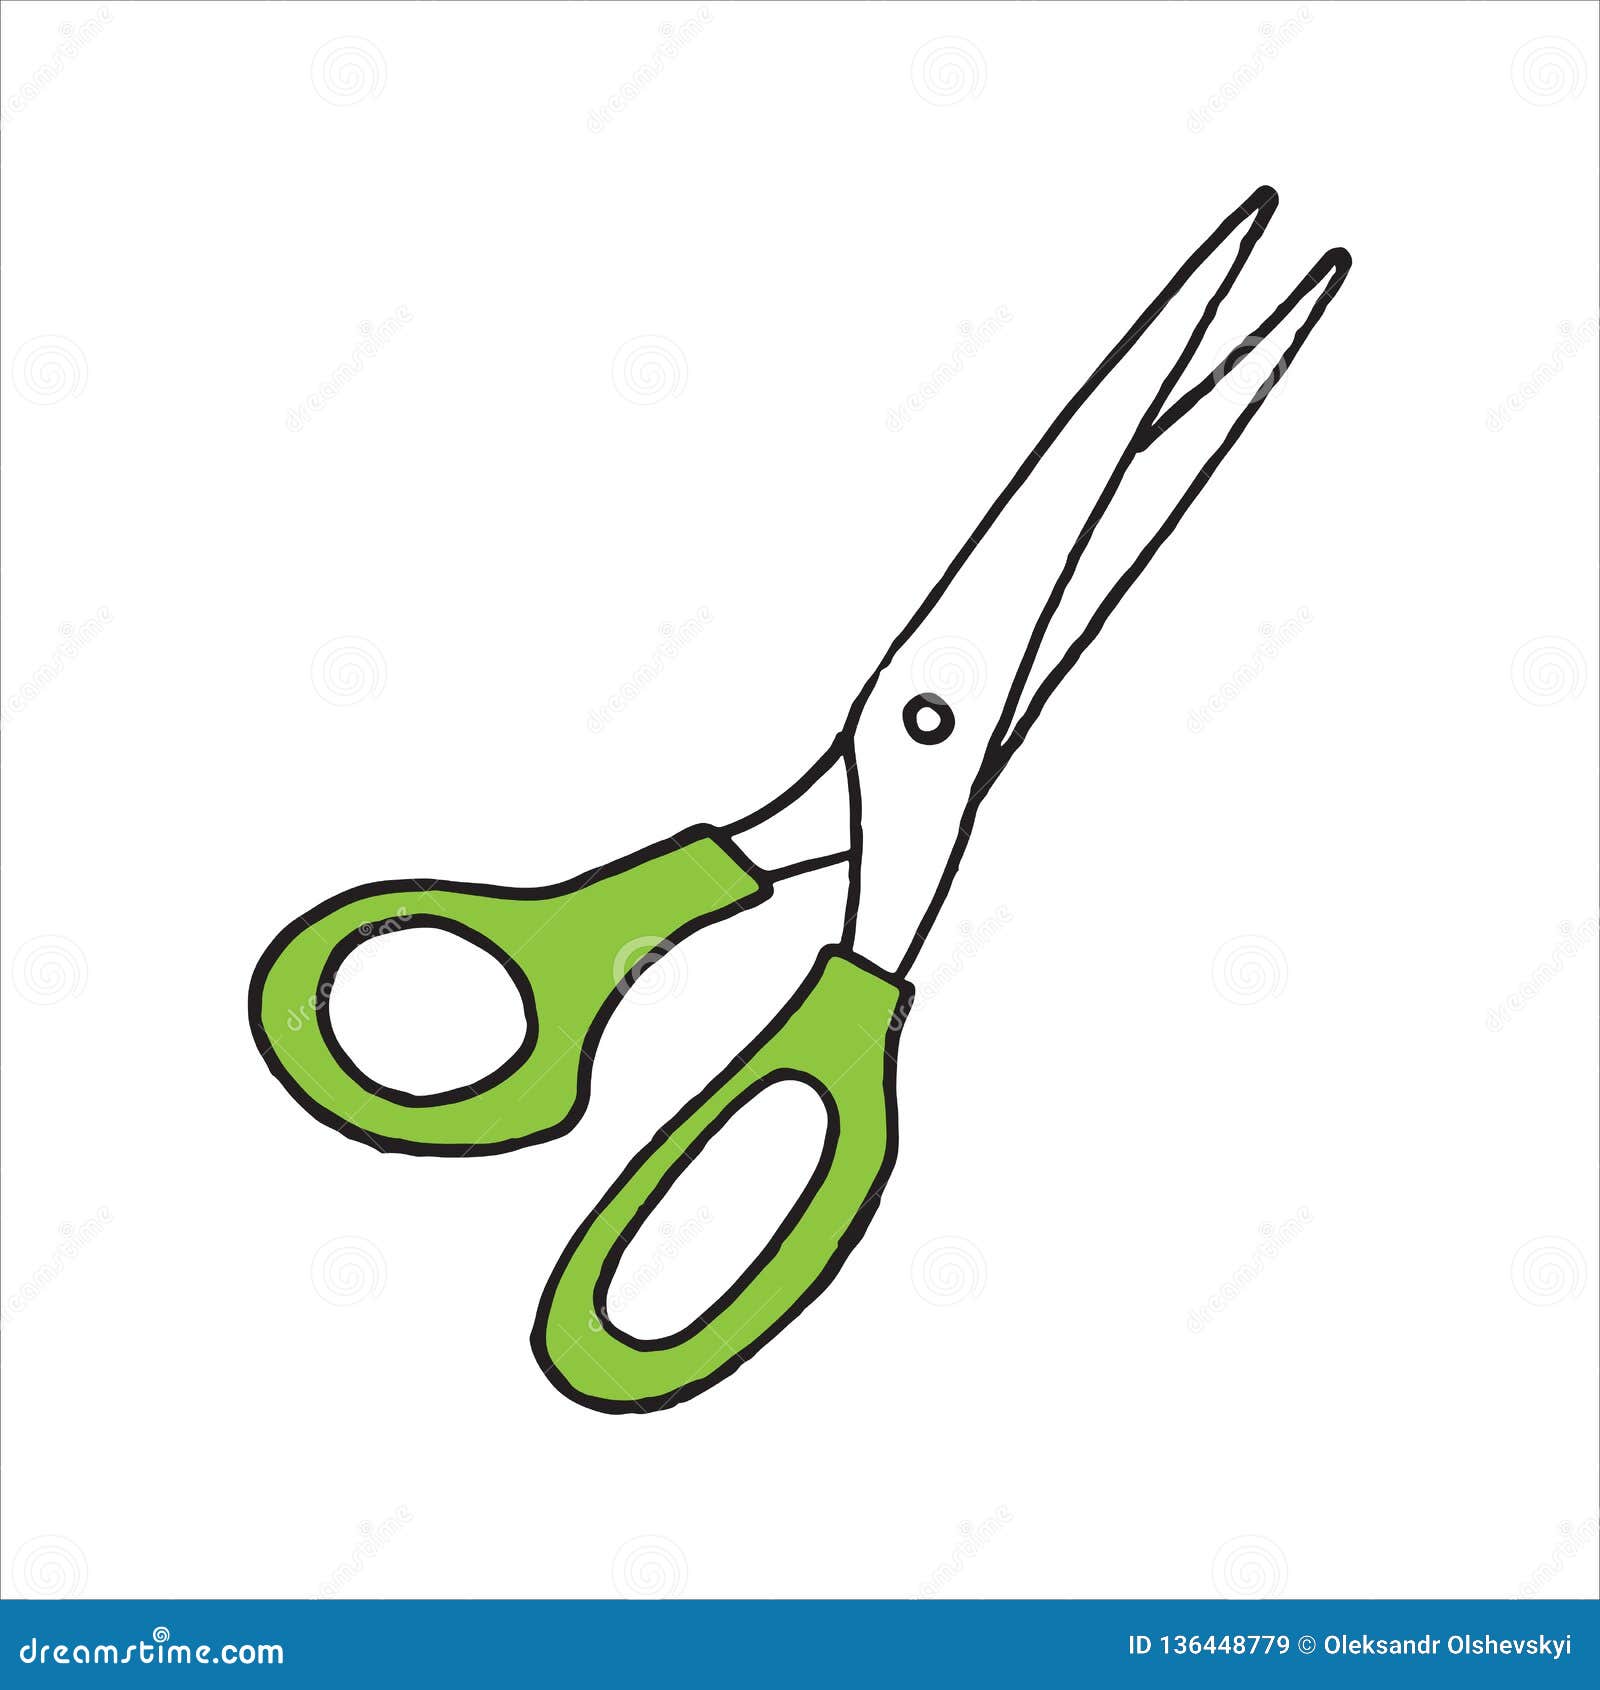 Scissors and comb sketch Royalty Free Vector Image